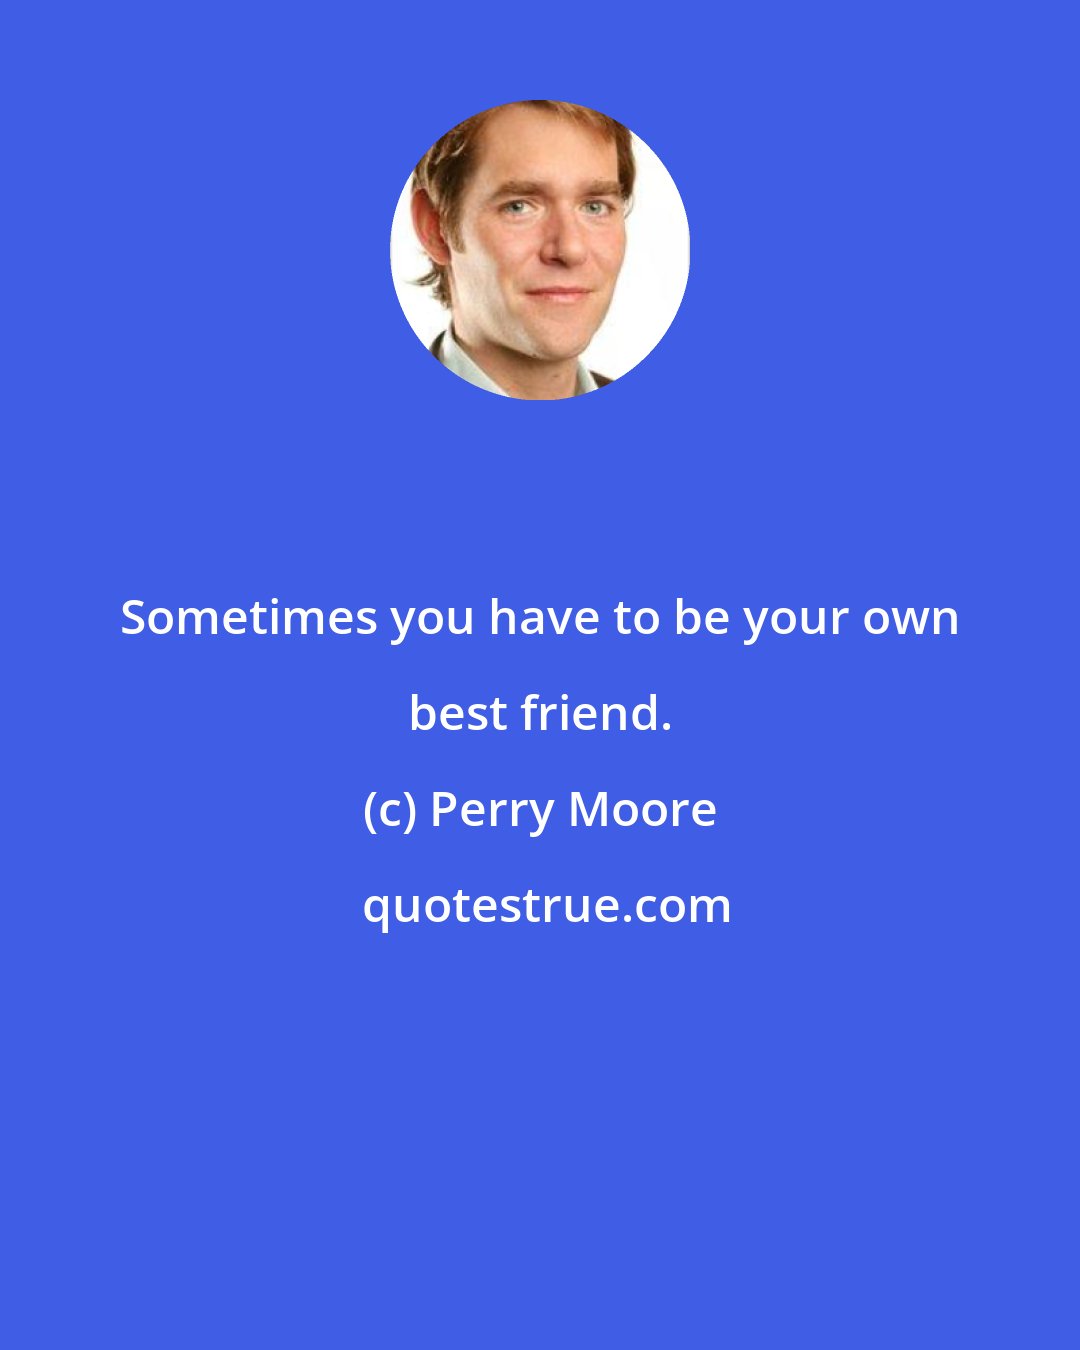 Perry Moore: Sometimes you have to be your own best friend.